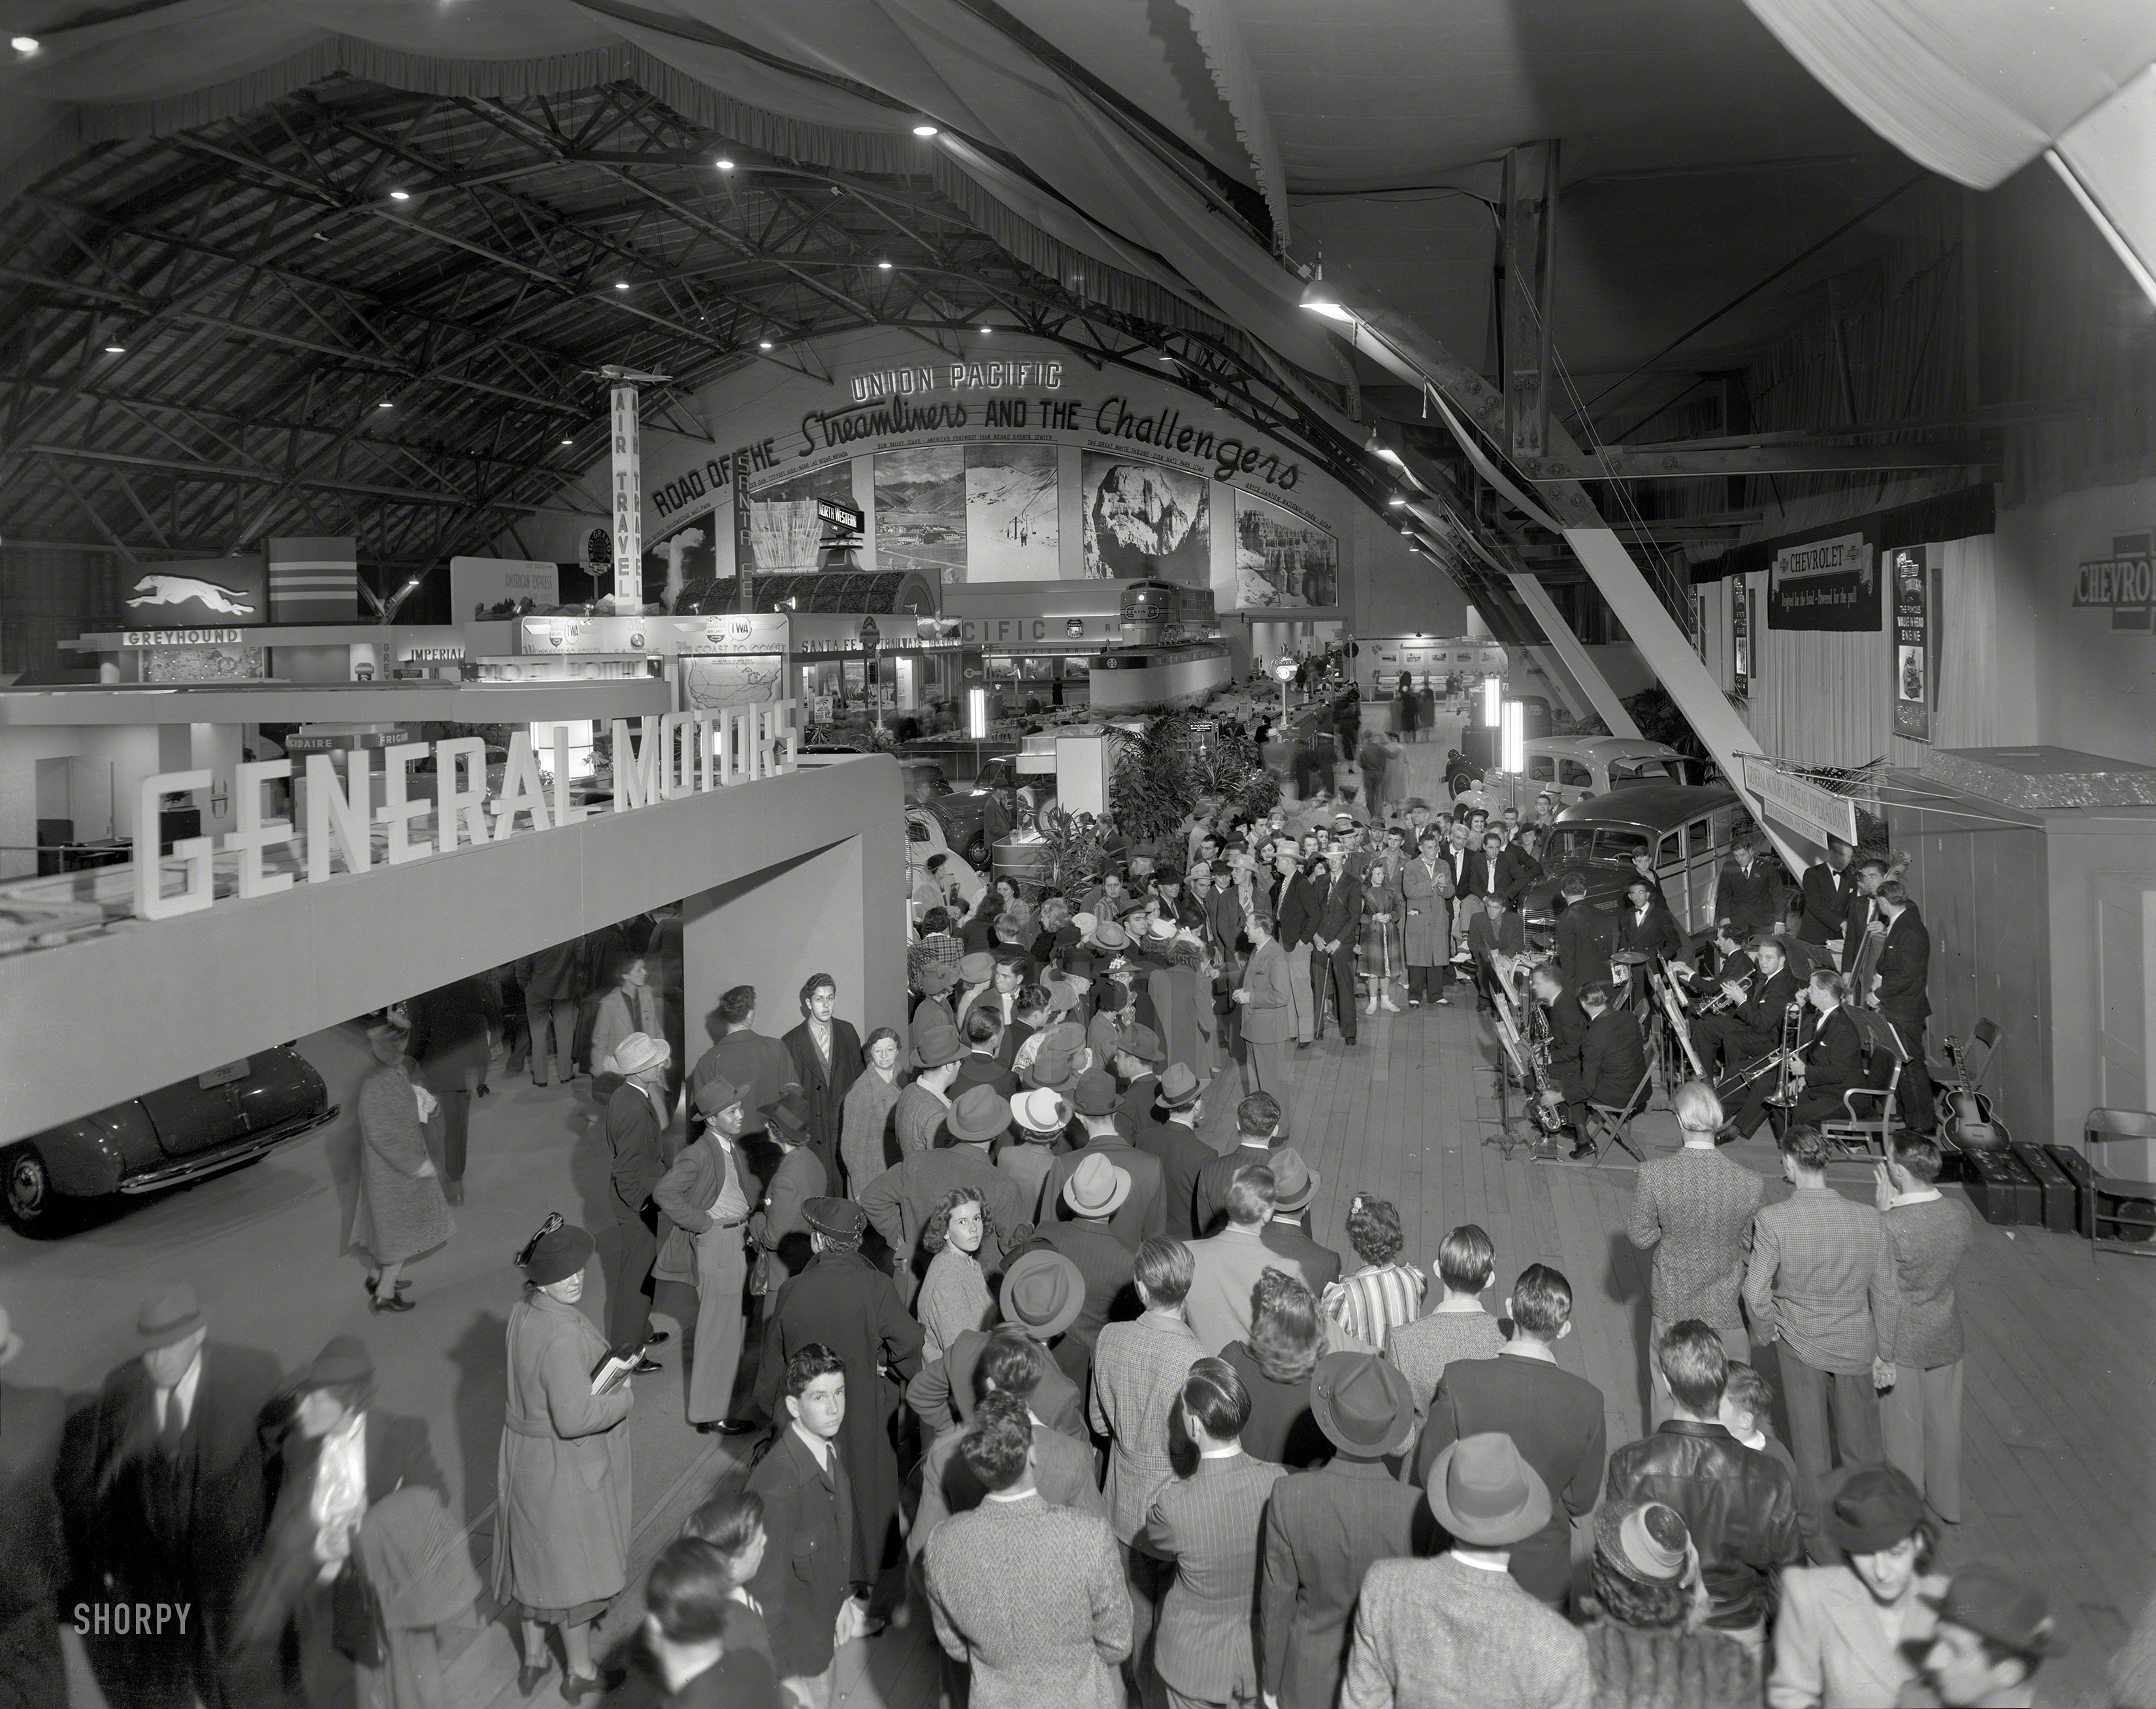 "Golden Gate International Exposition, San Francisco, 1939. Transportation hall." Exhibits by General Motors and Union Pacific dominate this view, with TWA, Greyhound and Santa Fe also showing up. 8x10 acetate negative. View full size.